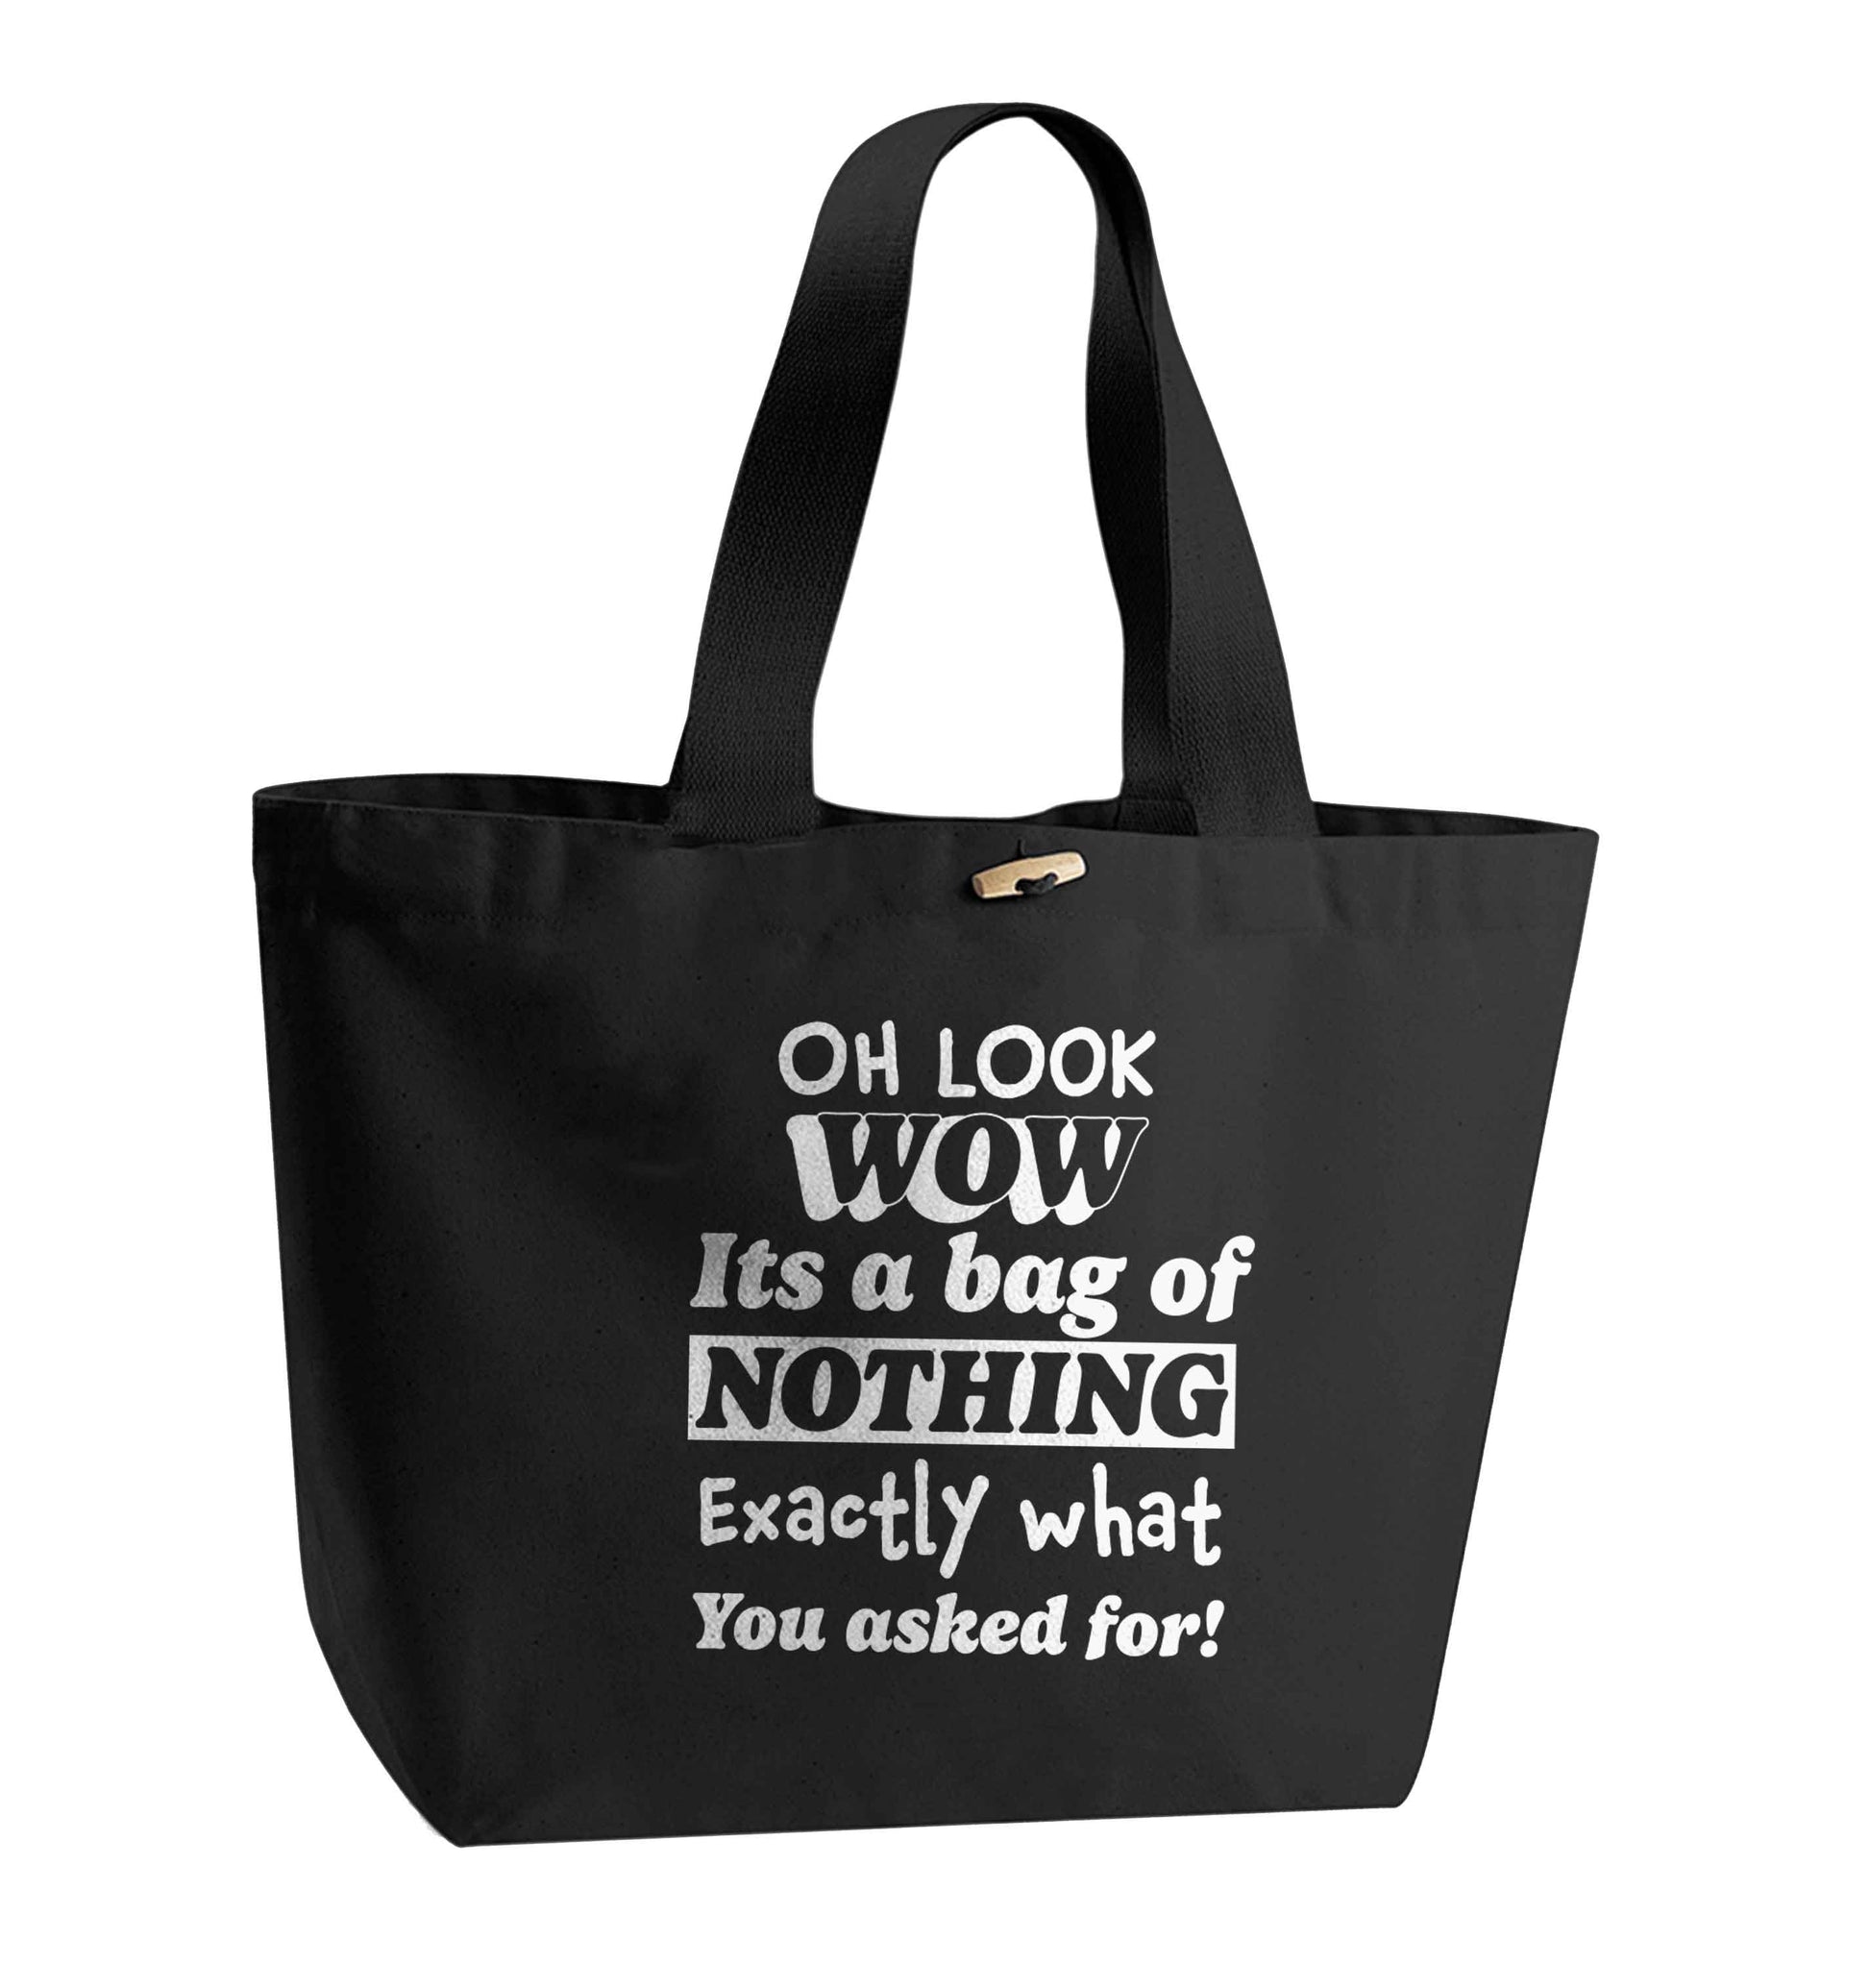 Oh wow look a bag of nothing just like you asked for organic cotton premium tote bag with wooden toggle in black